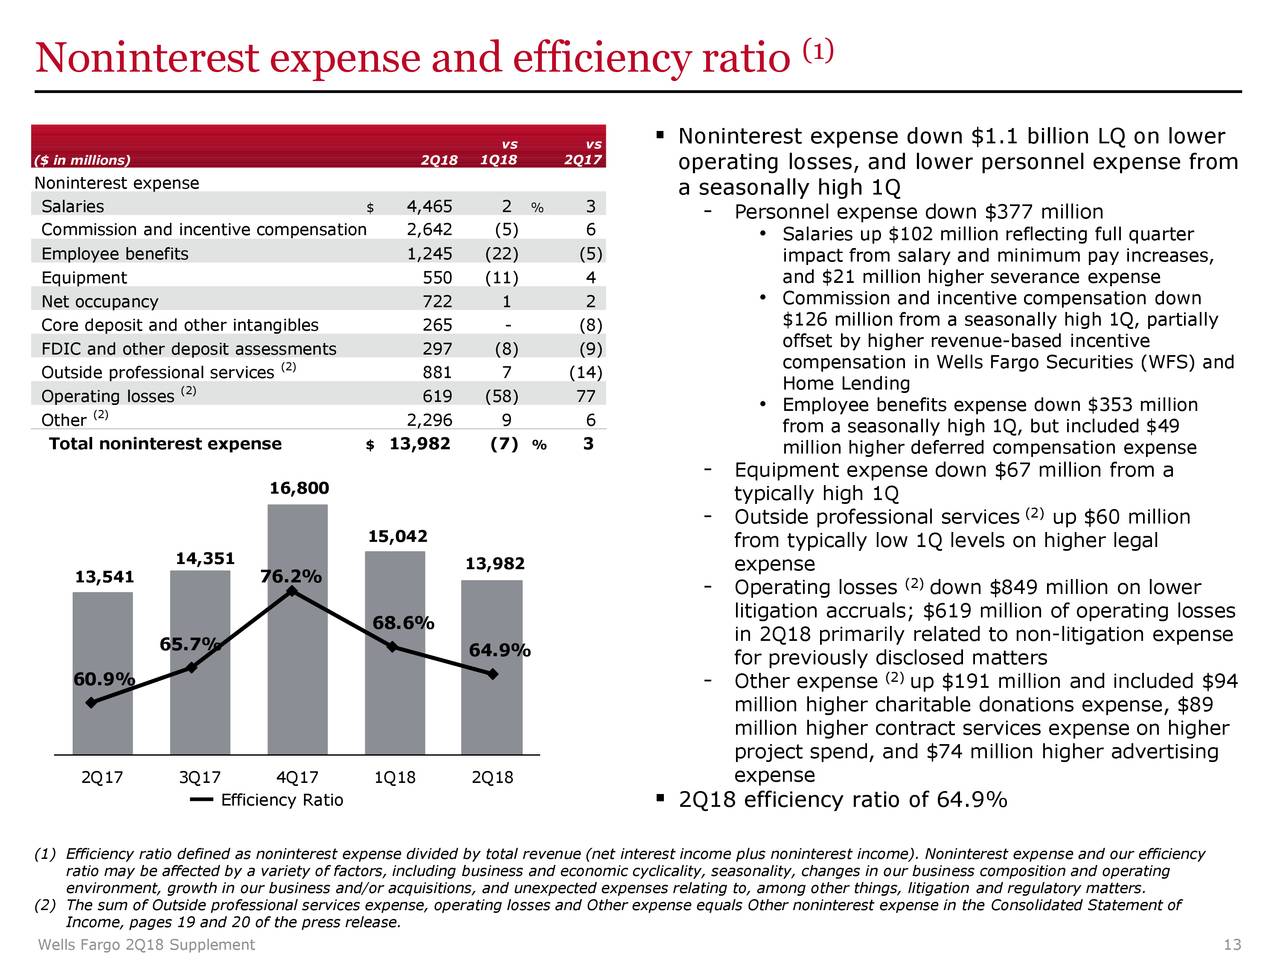 Noninterest expense and efficiency ratio                                             (1)